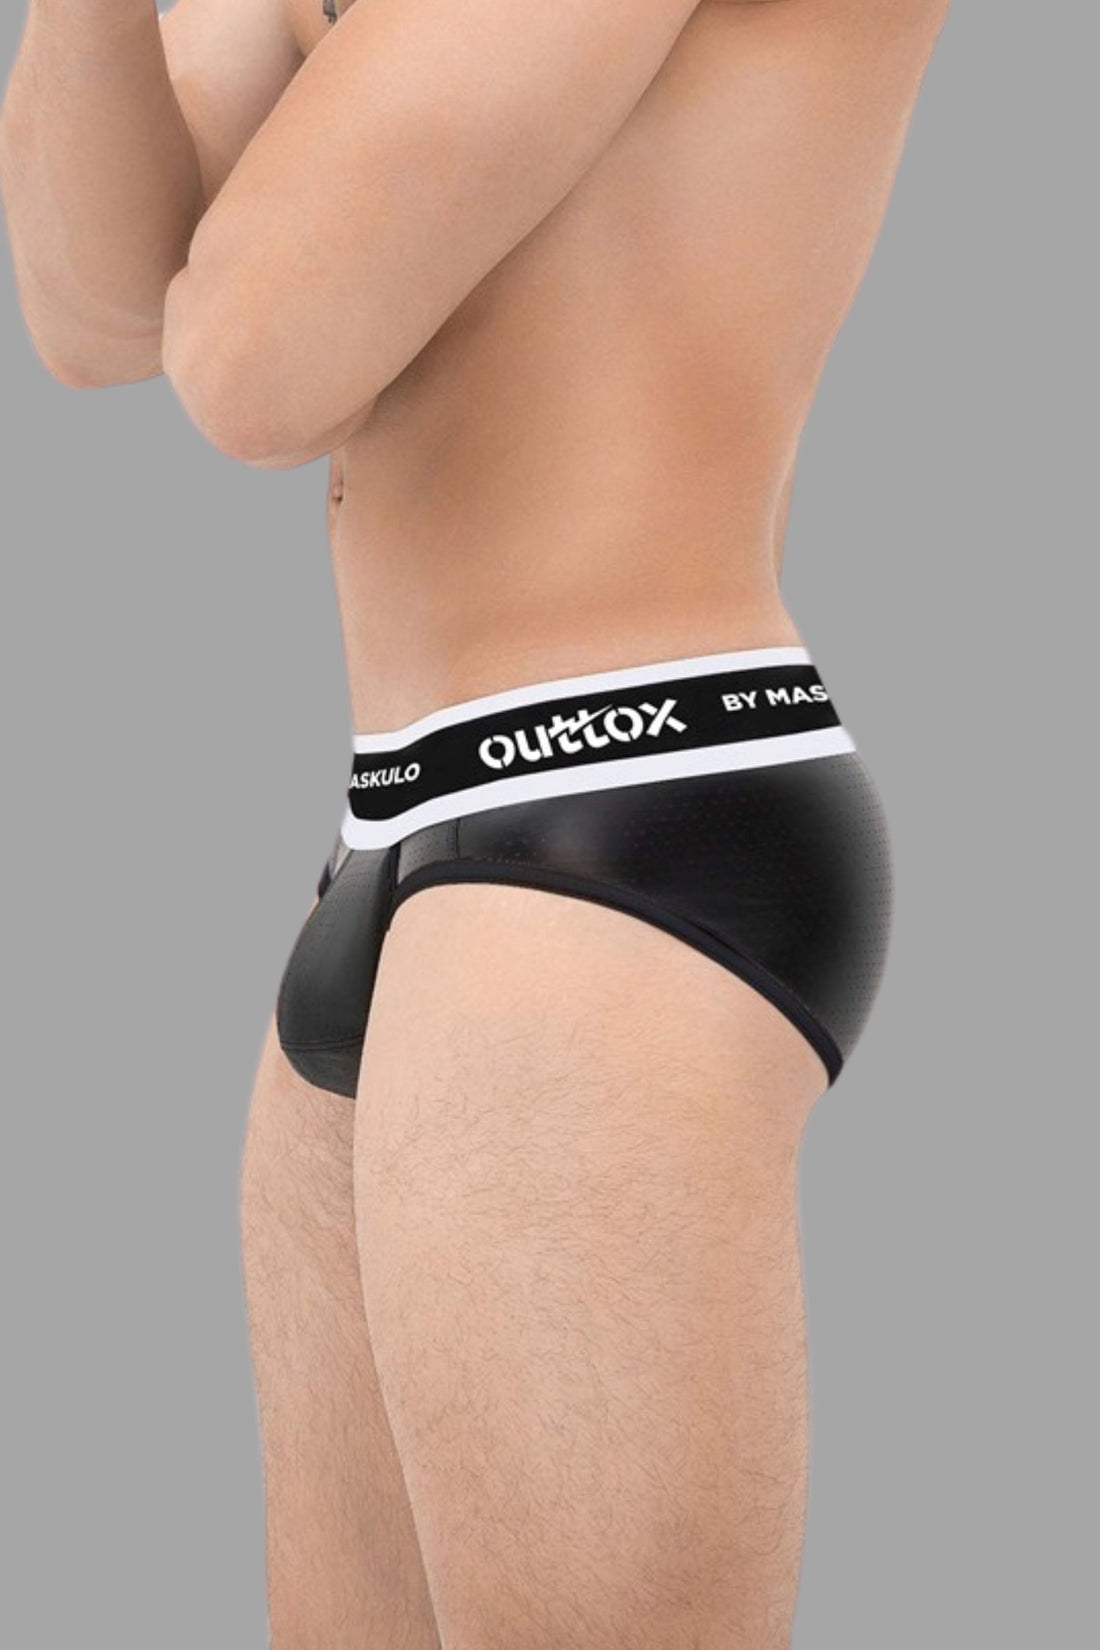 Outtox. Wrapped Rear Briefs with Snap Codpiece. Black